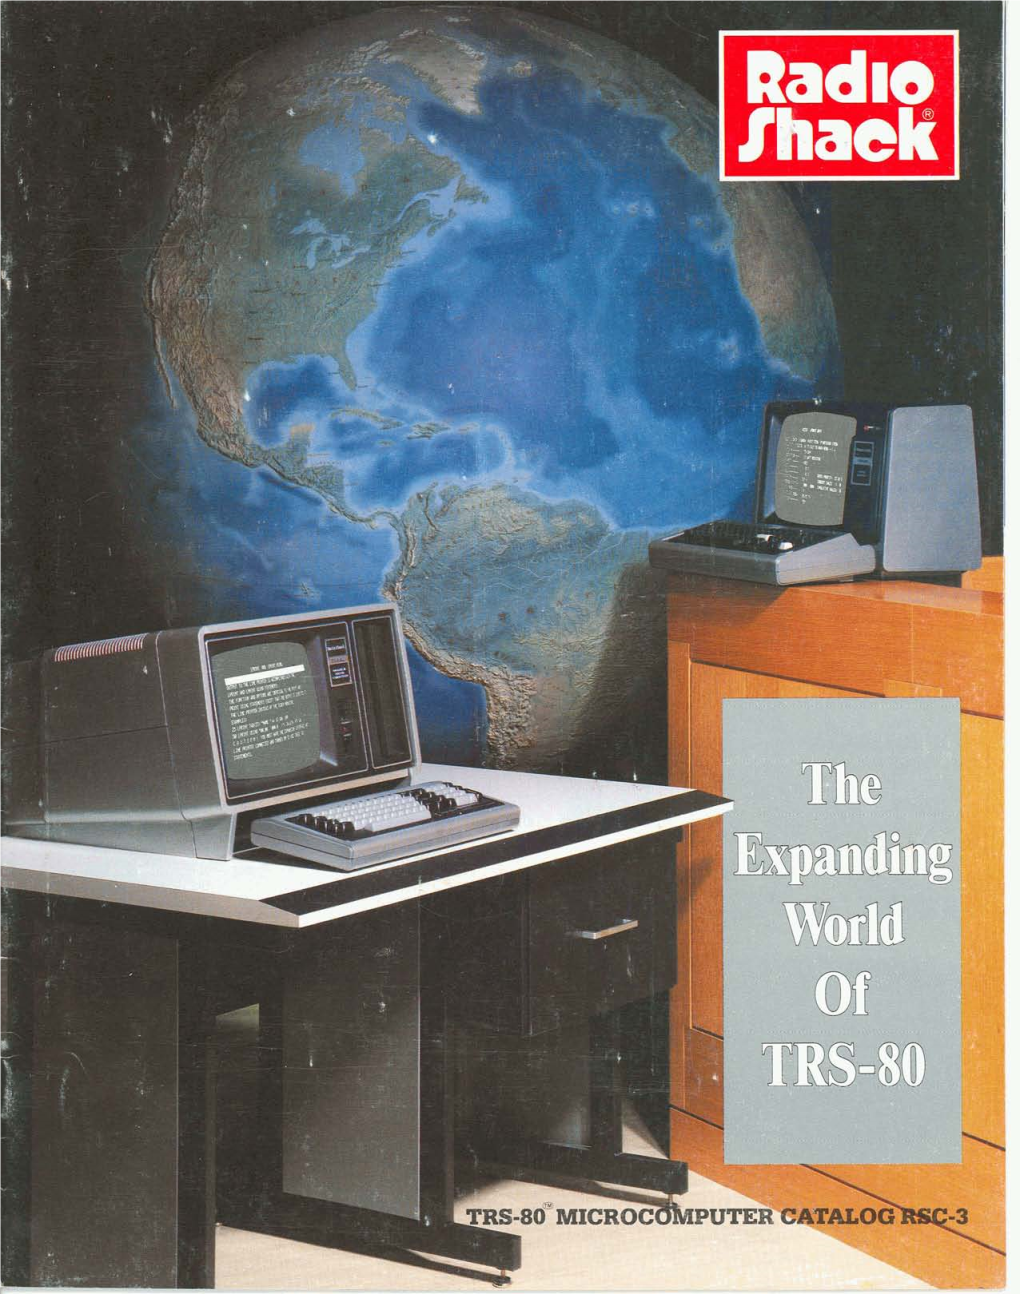 TRS-80:The Million- Your Judgement Thoughtfully